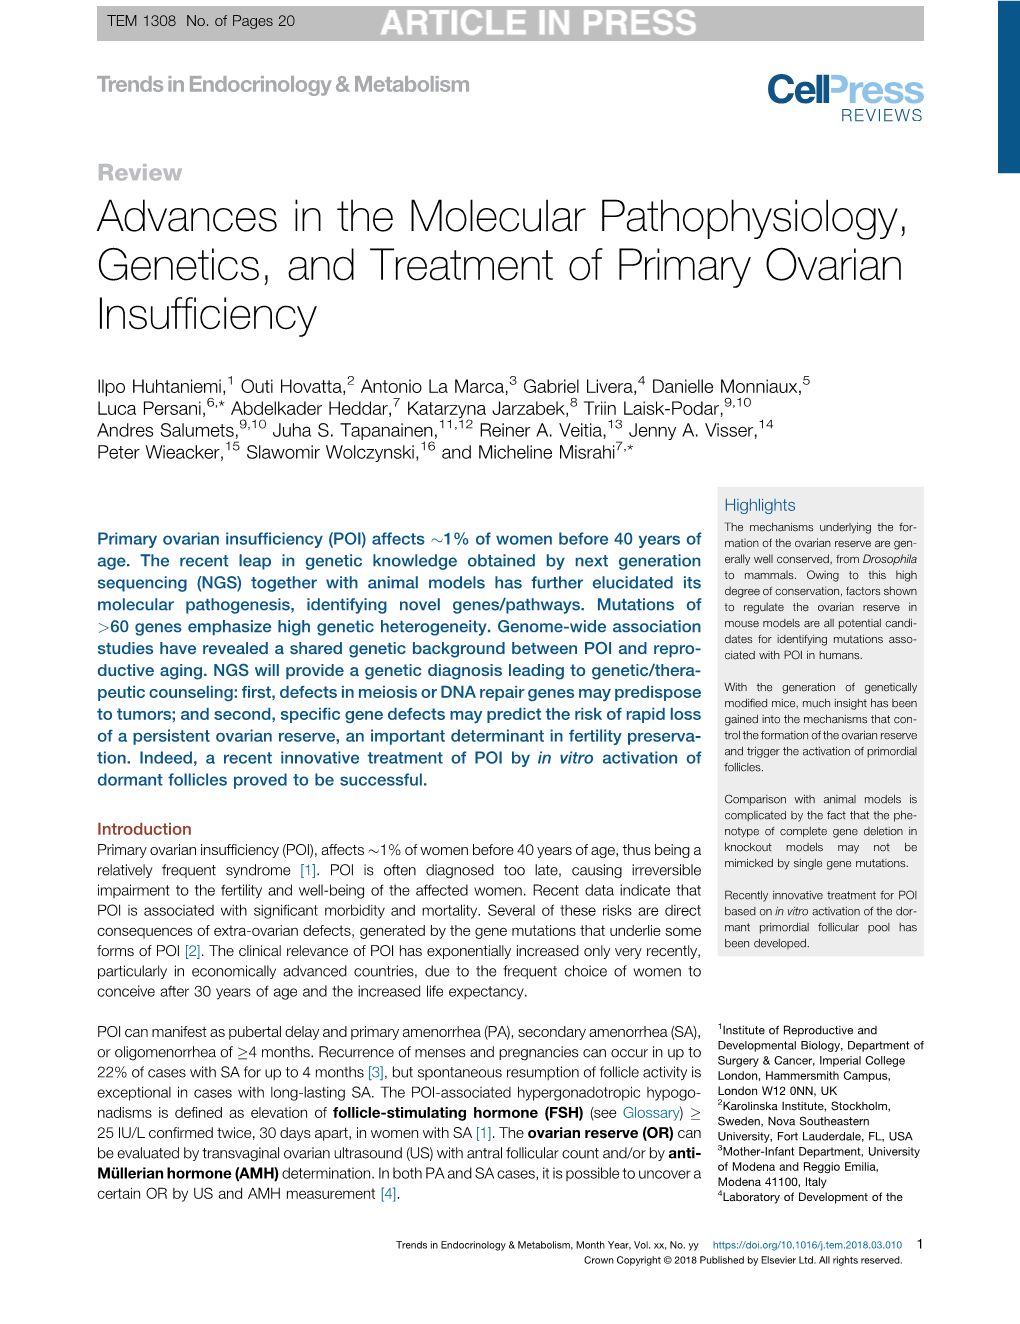 Advances in the Molecular Pathophysiology, Genetics, and Treatment of Primary Ovarian Insufficiency